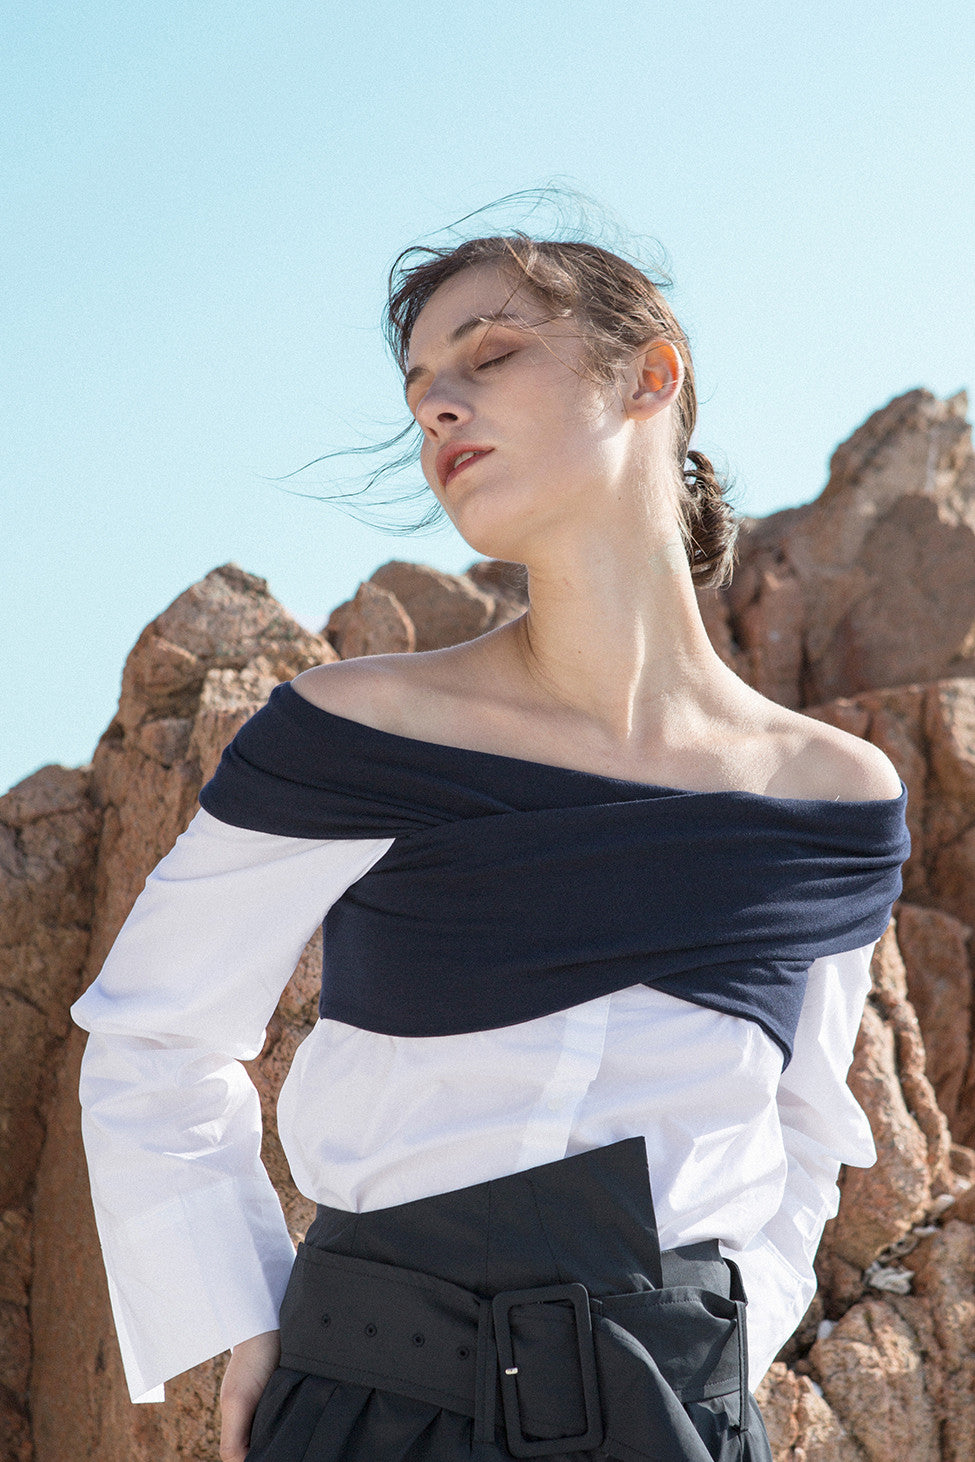 The Roio Top featuring off-the-shoulder neckline with button-down shirt and long sleeves.